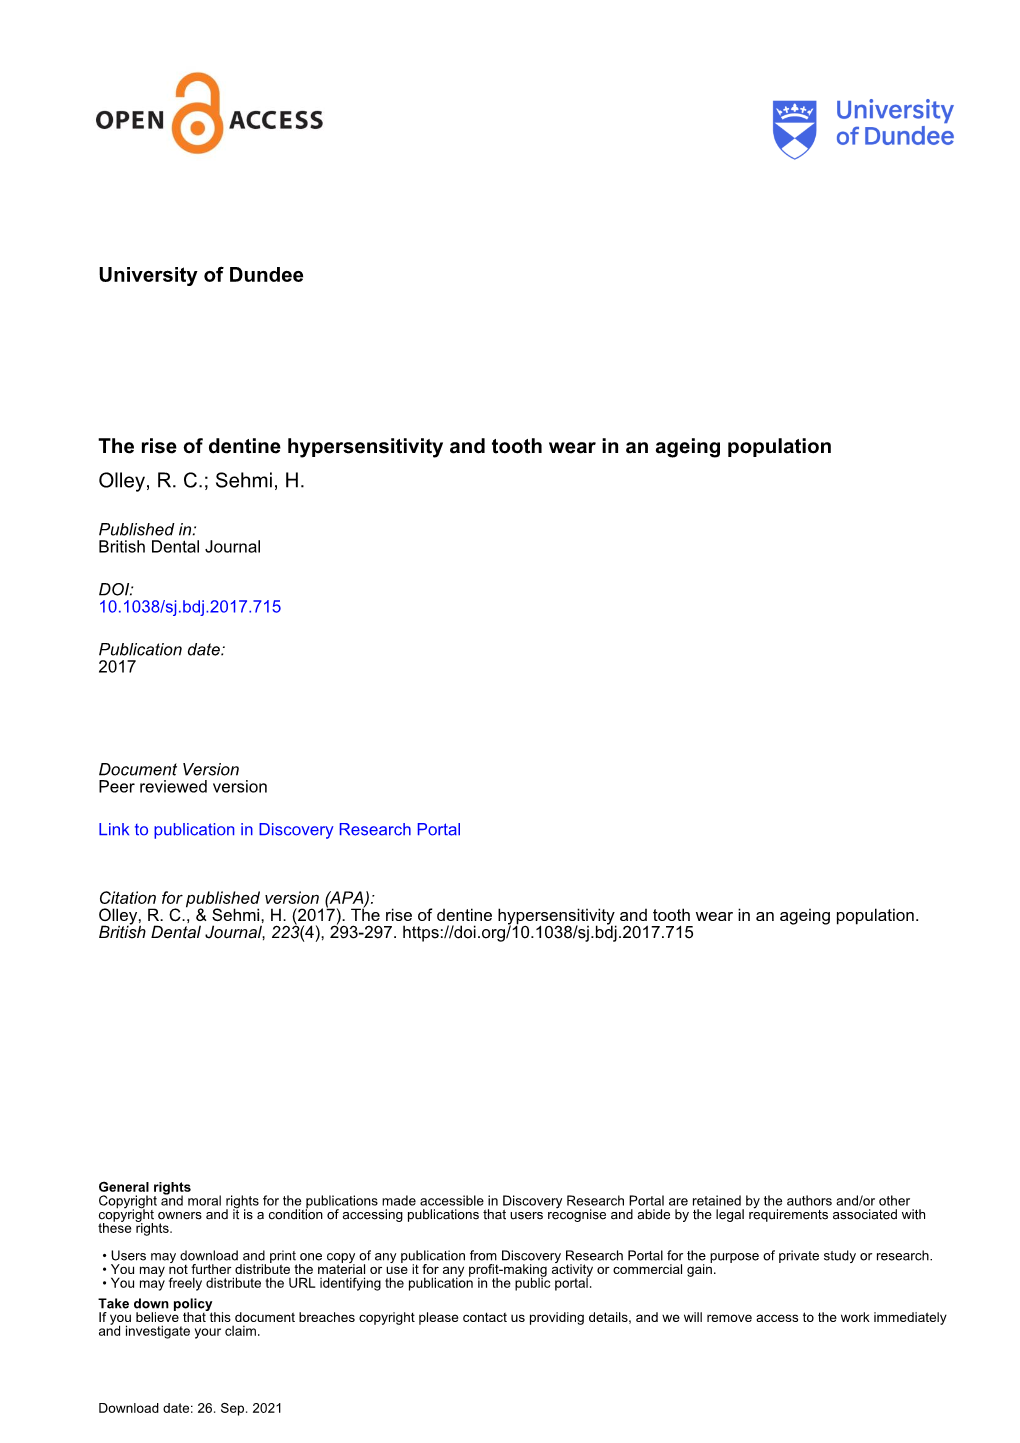 University of Dundee the Rise of Dentine Hypersensitivity and Tooth Wear in an Ageing Population Olley, R. C.; Sehmi, H